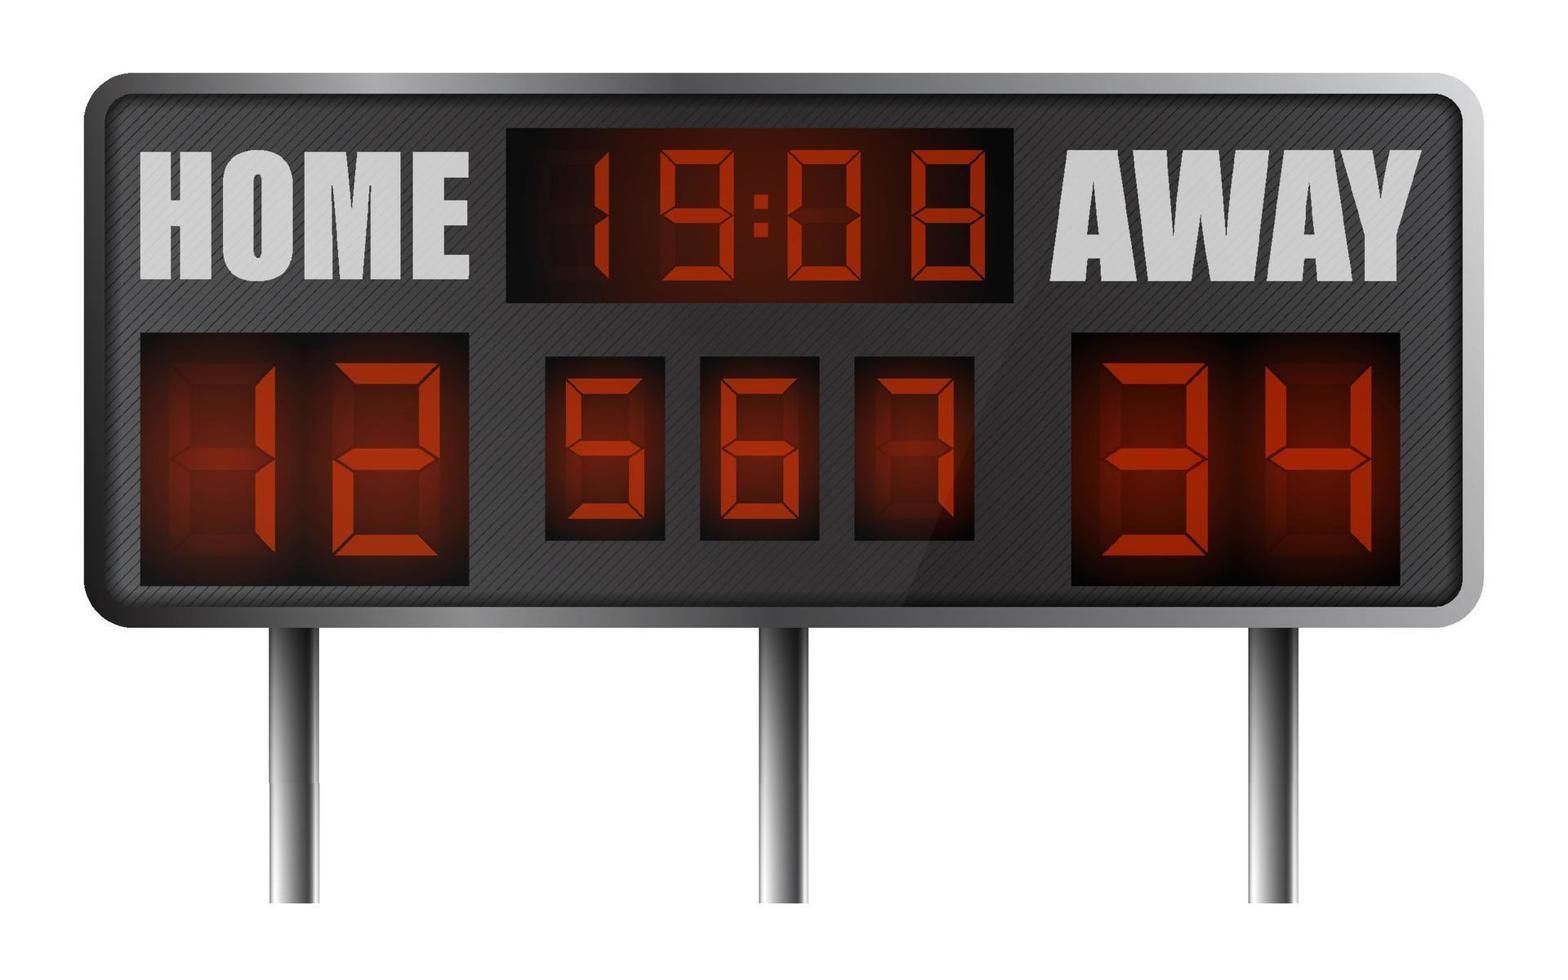 realistic electronic sports scoreboard. Score on board during match on field. Team sports. Active lifestyle. Vector